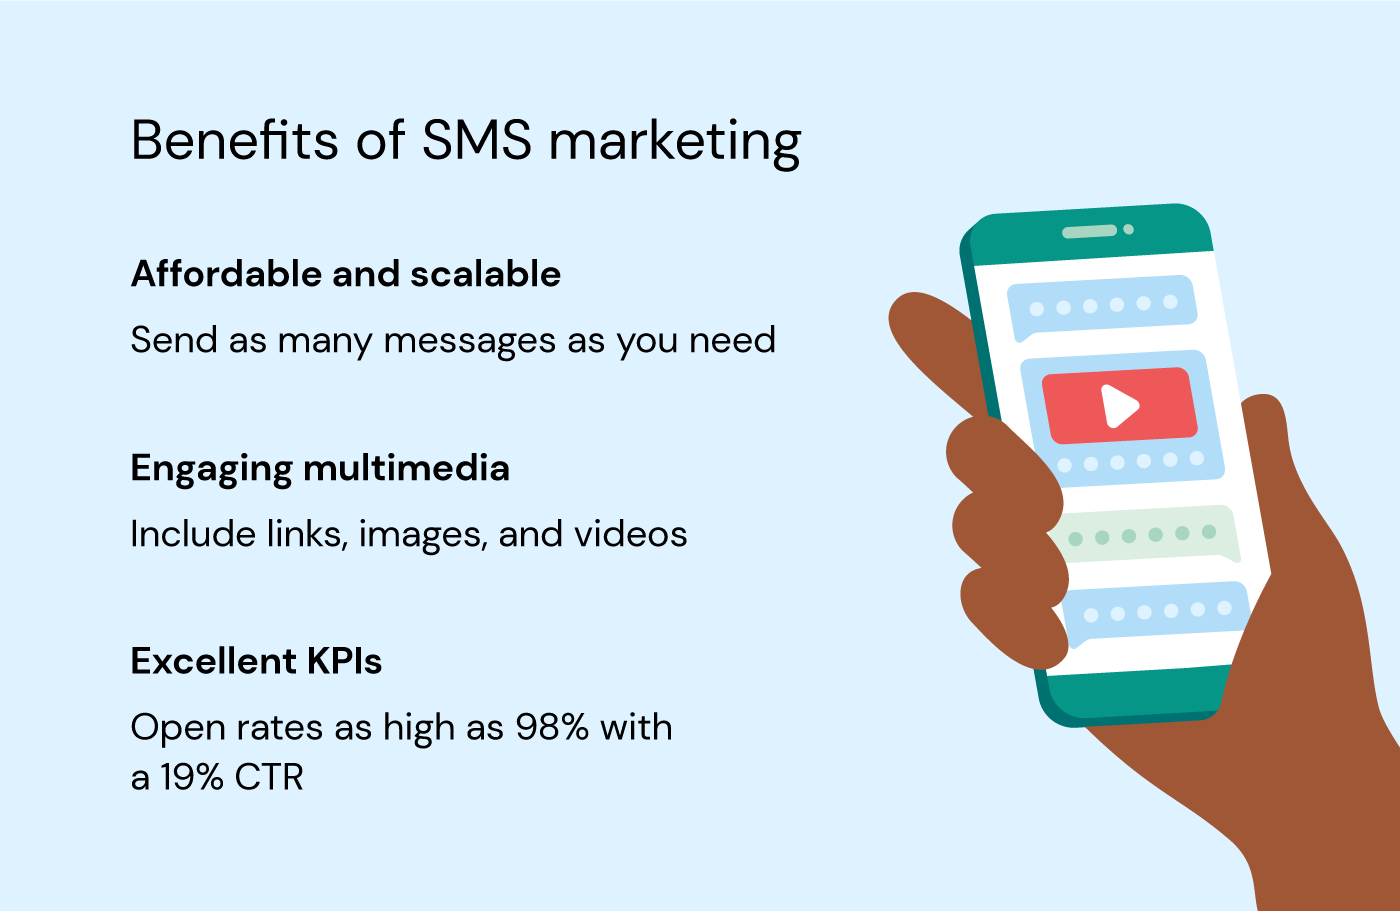 LSKD Makes SMS the Heart of Their Marketing Strategy